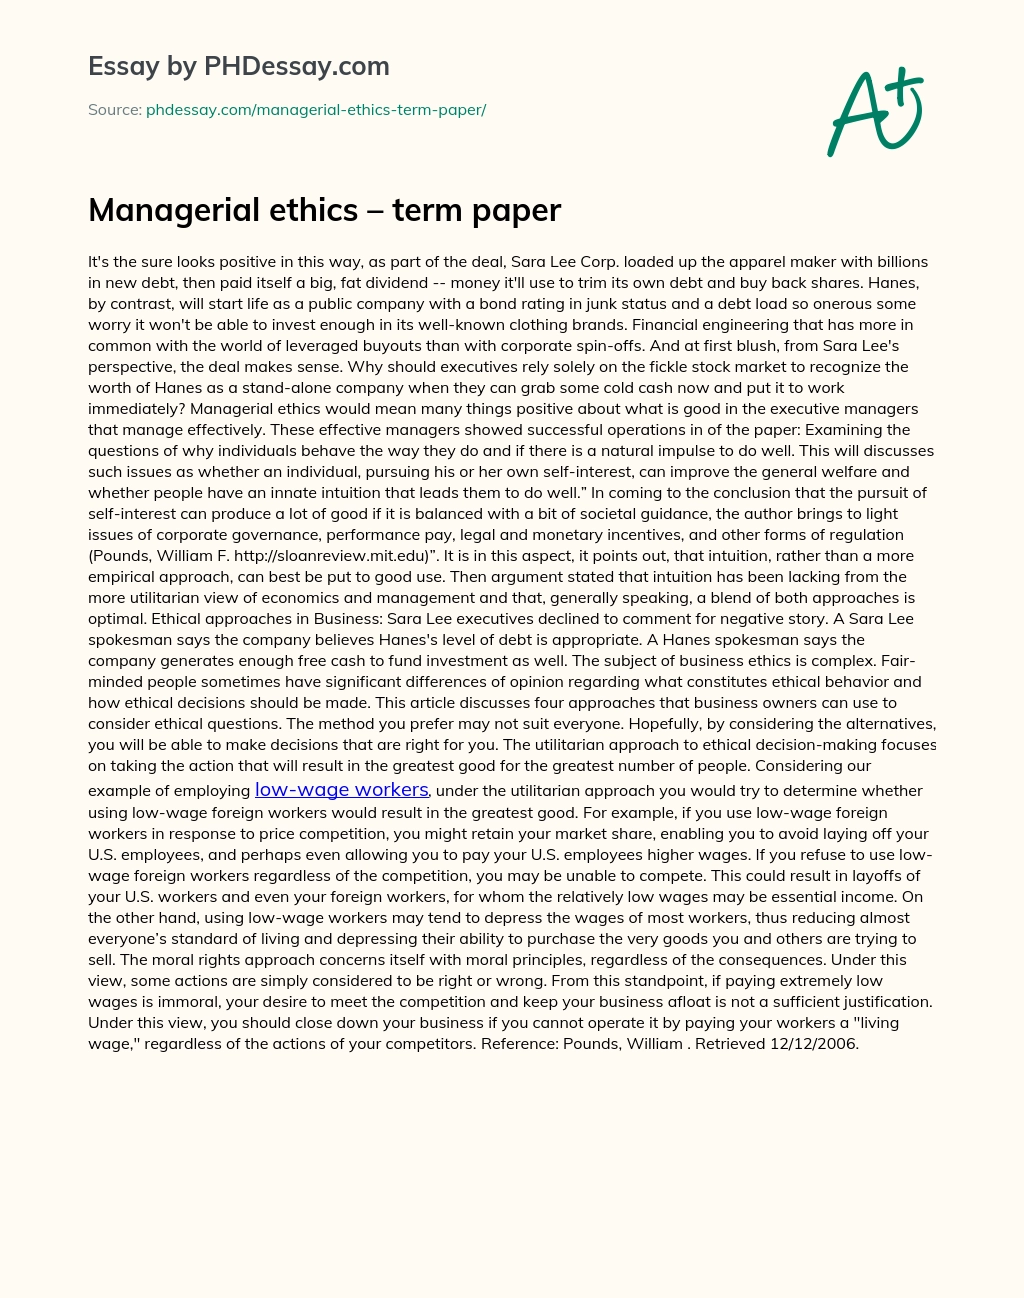 Managerial ethics – term paper essay